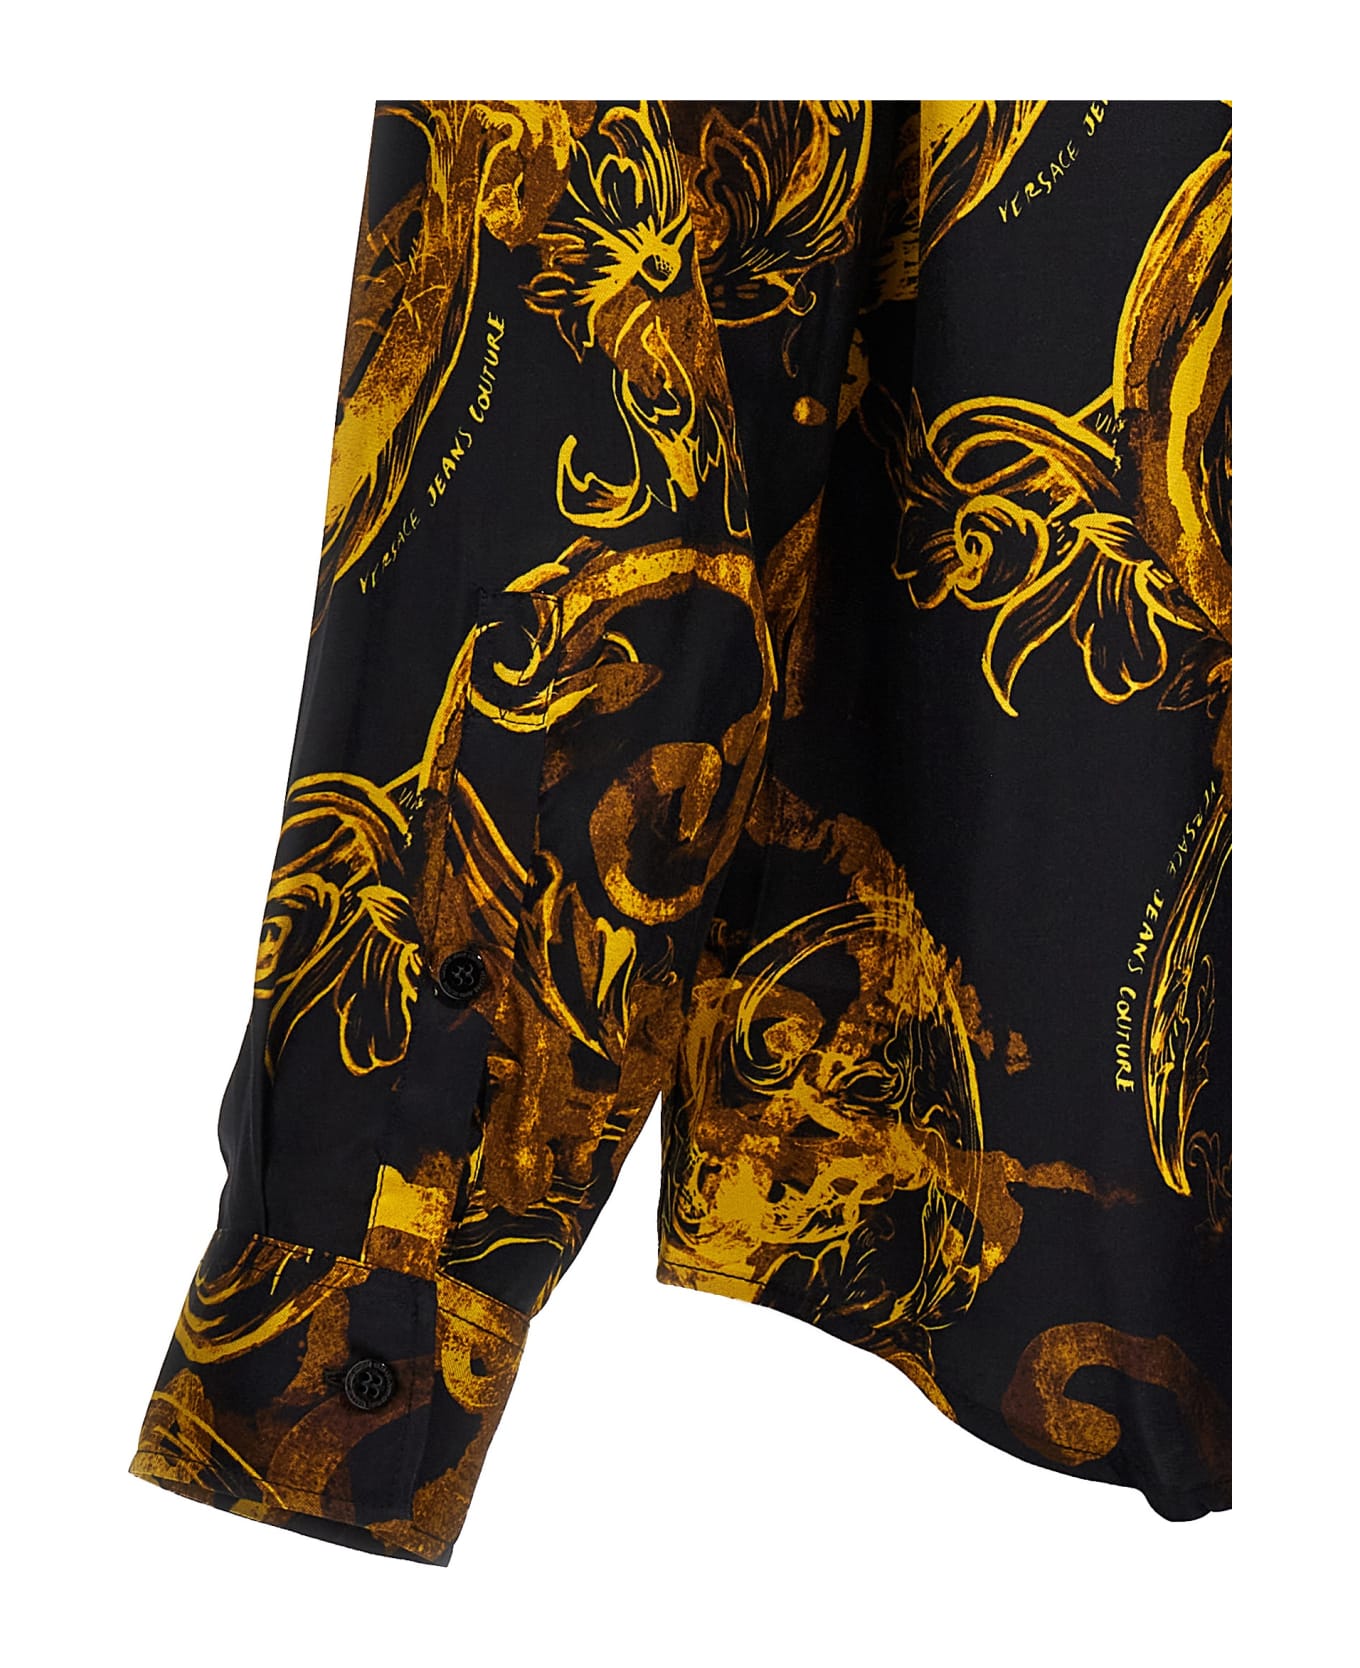 Versace Jeans Couture All Over Print Shirt - Multicolor シャツ